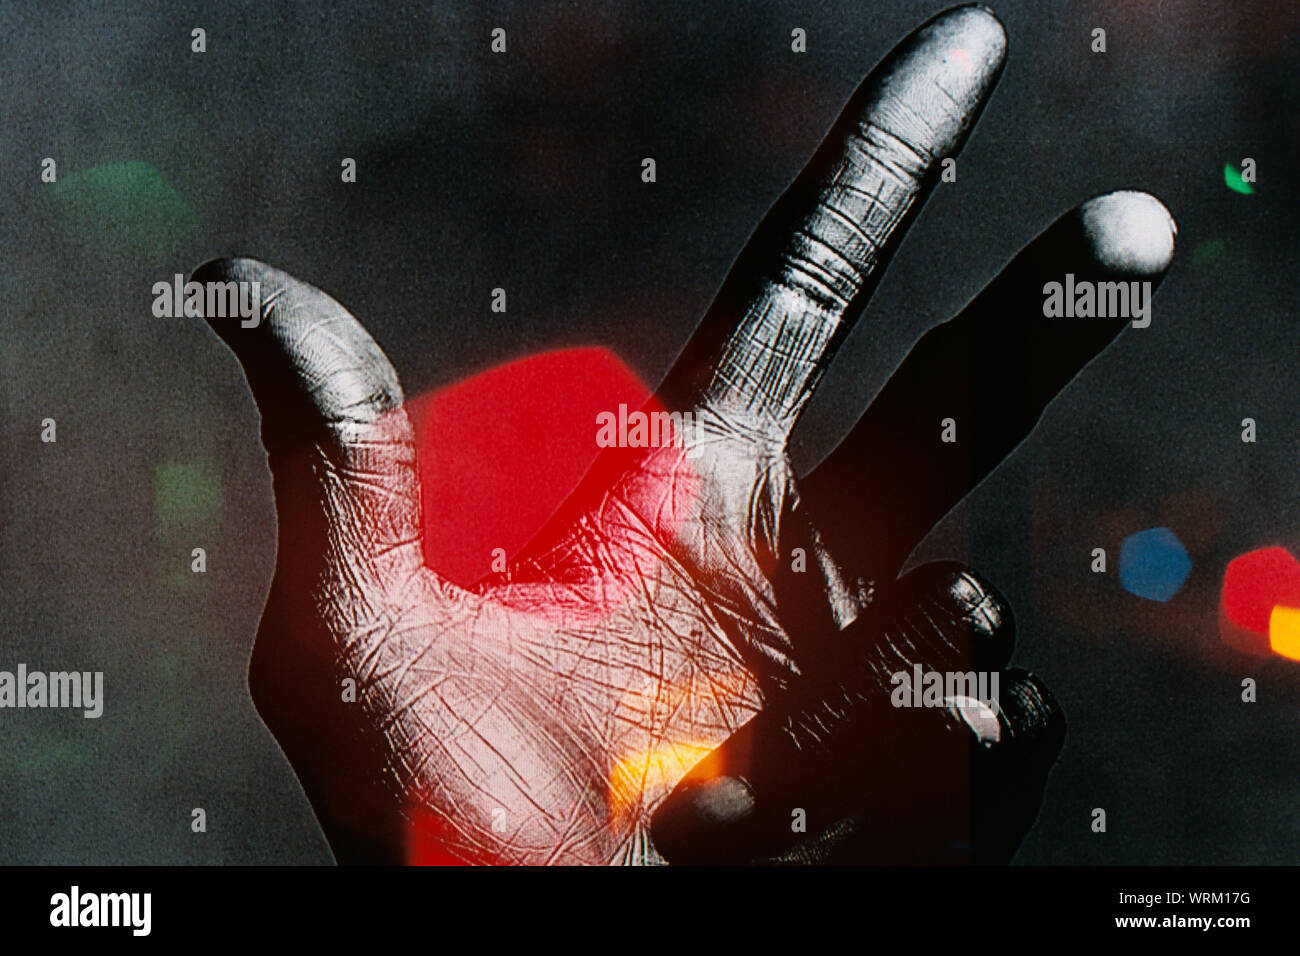 Digital Composite Of Cropped Hand Gesturing At Night Stock Photo